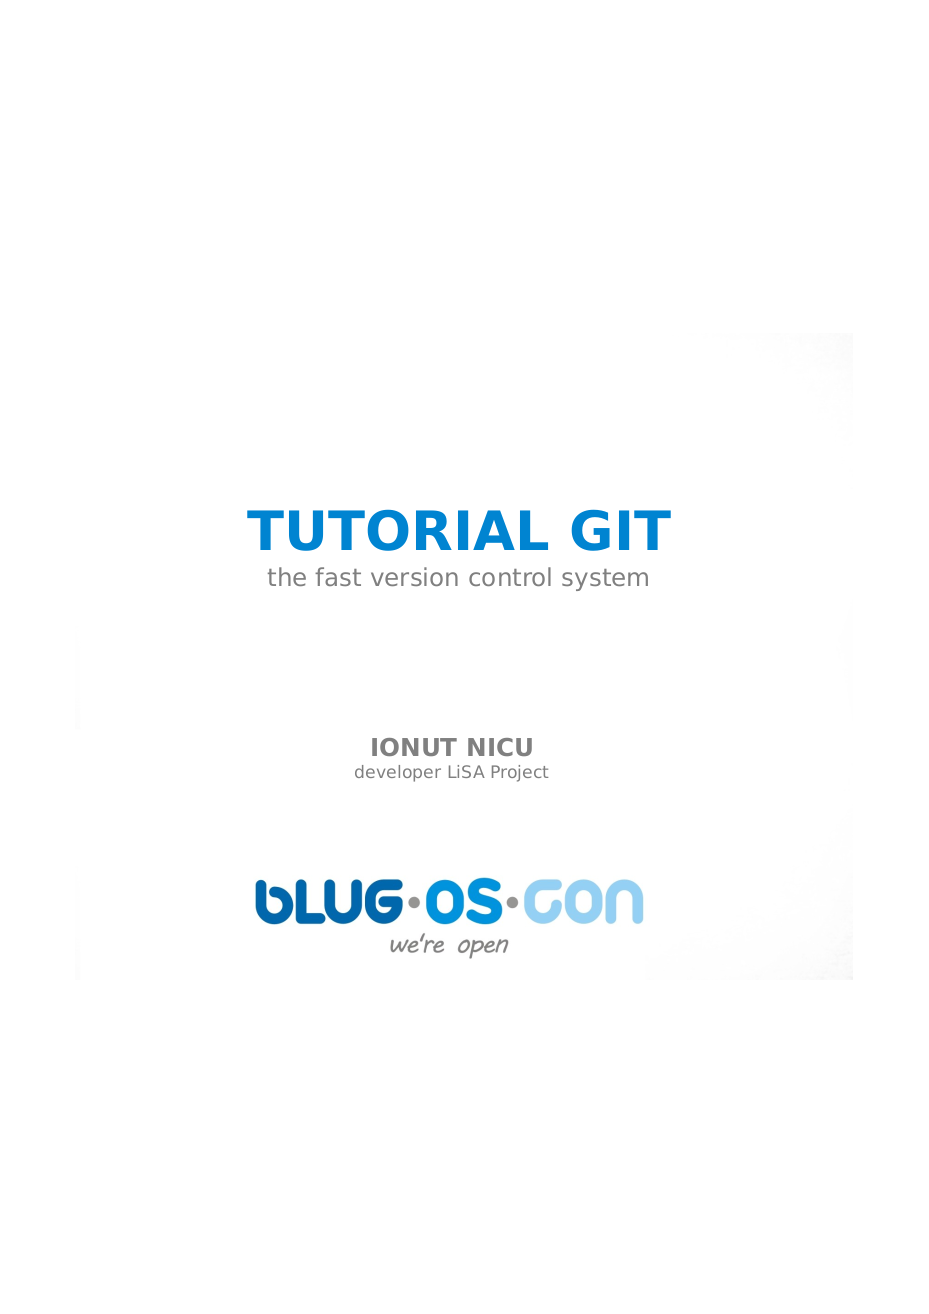 TUTORIAL GIT - the fast version control system